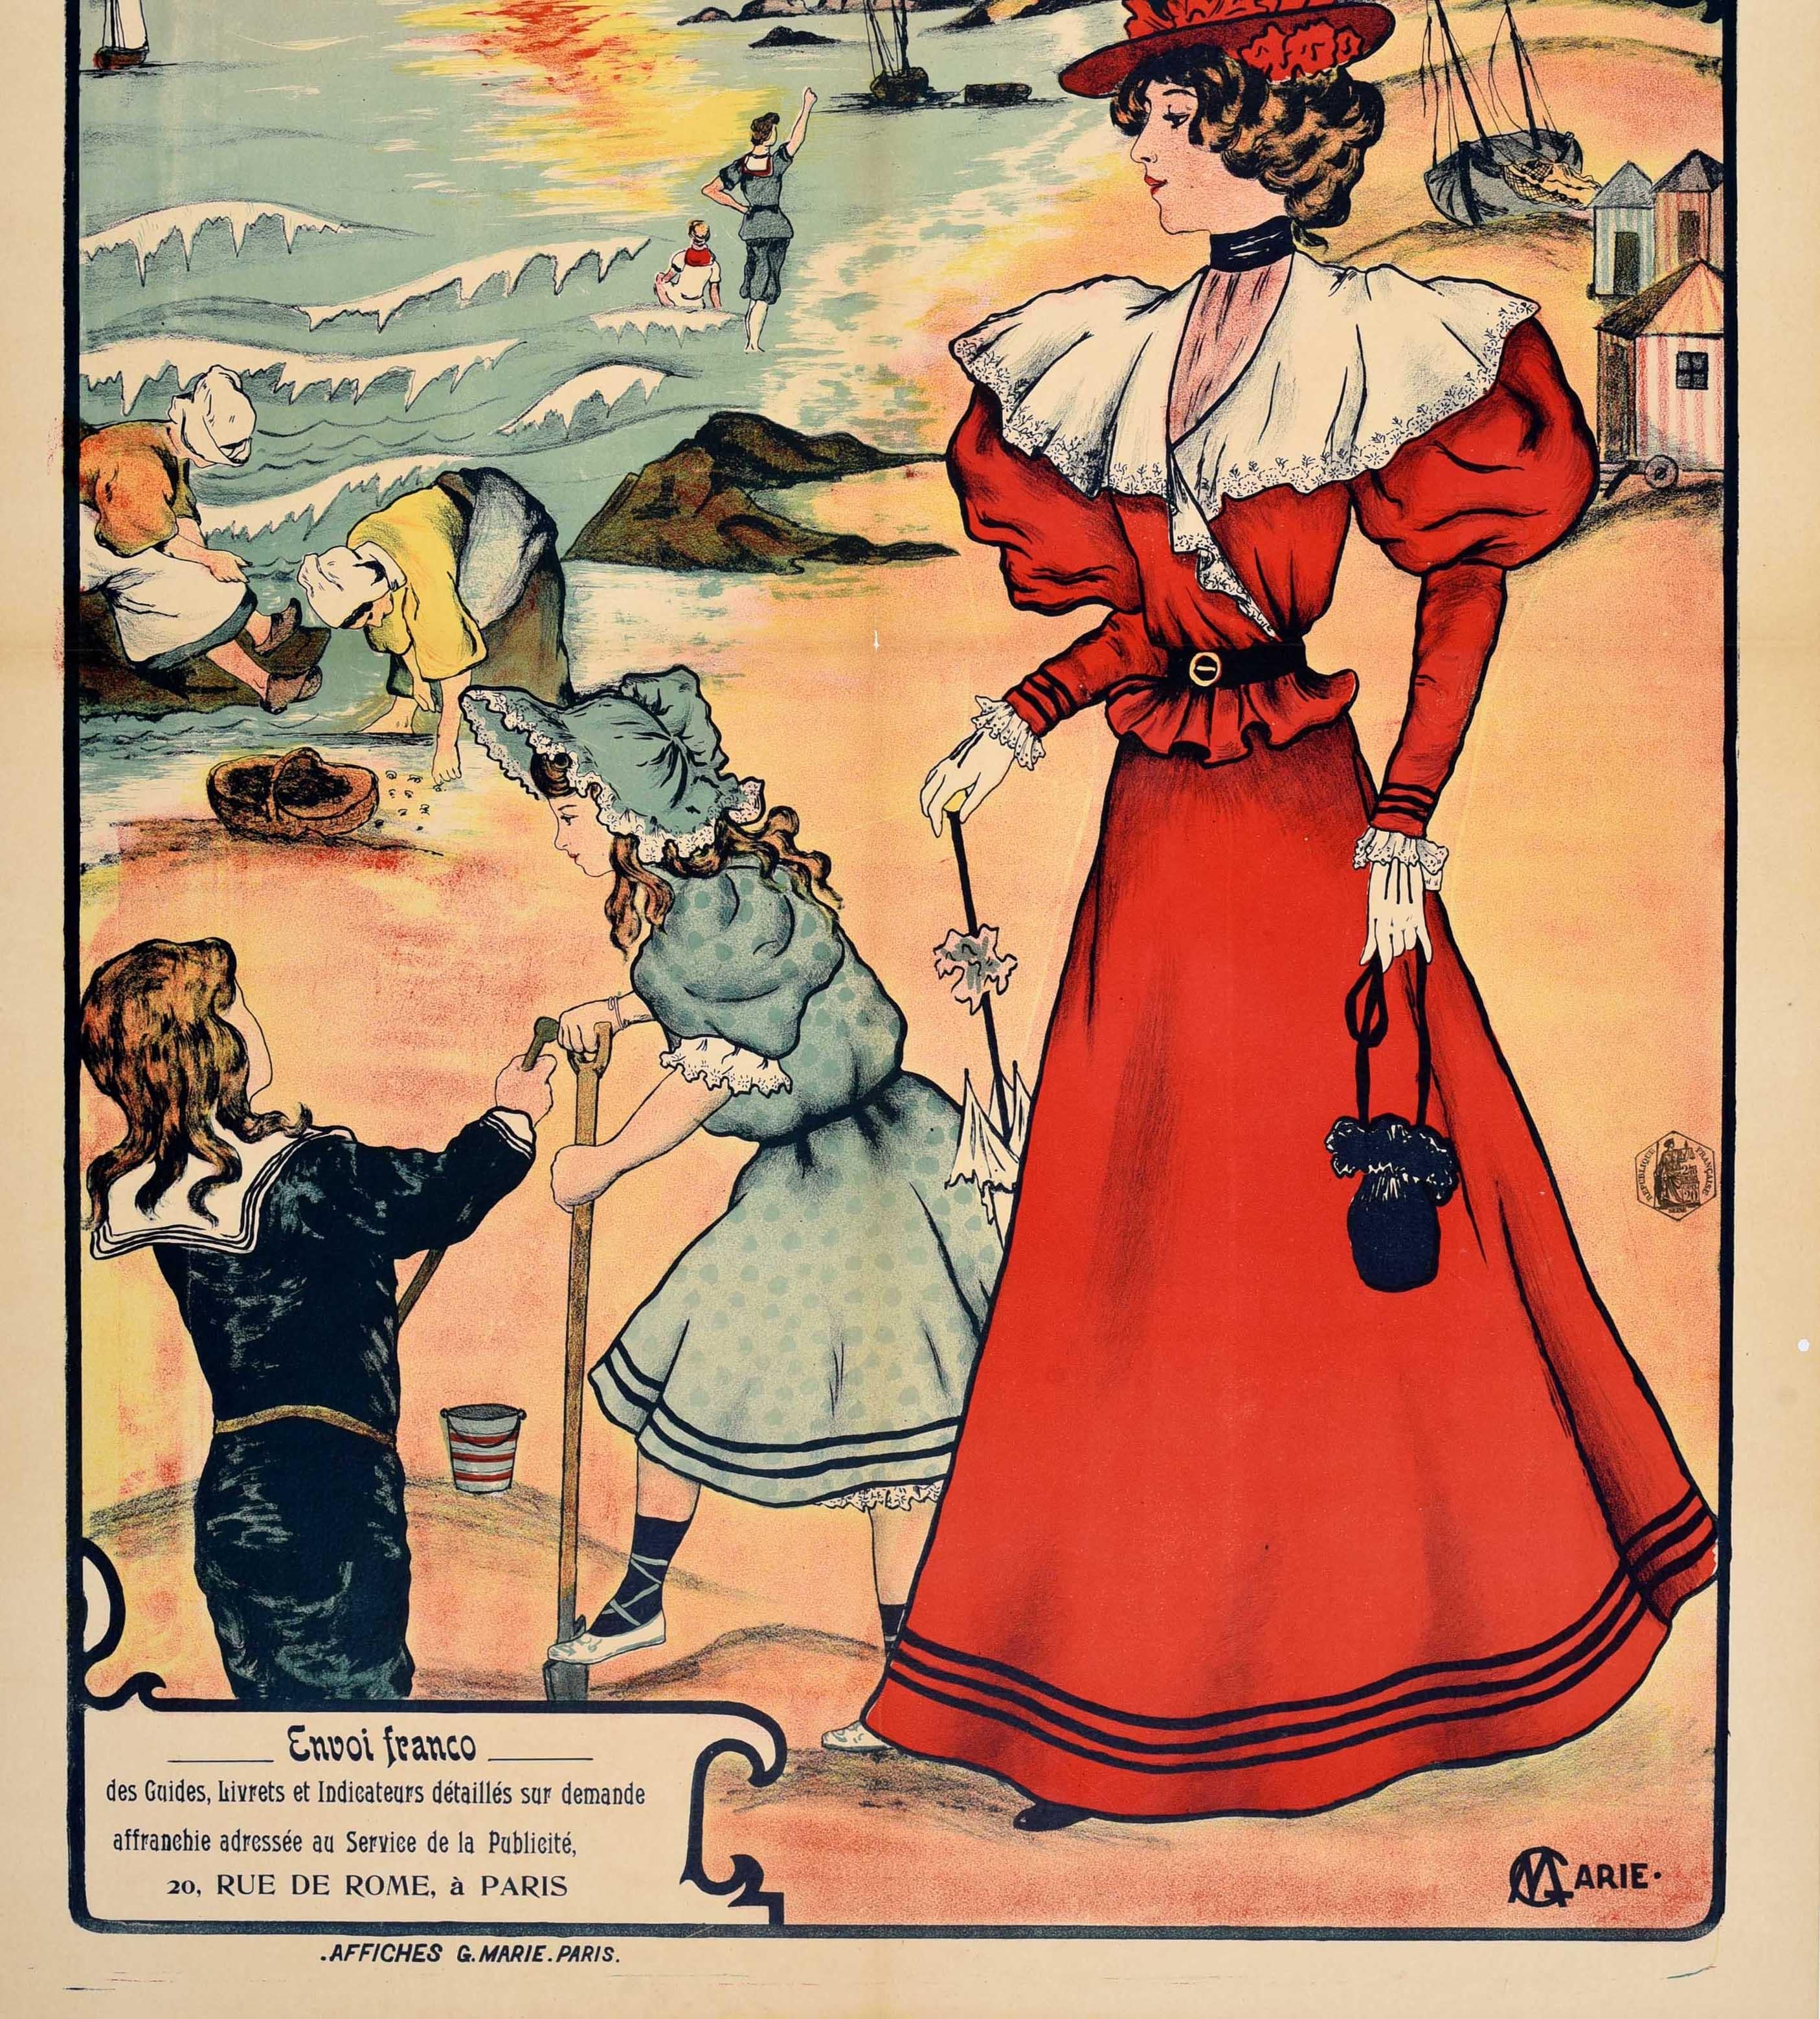 Original antique train travel poster for Normandy and Brittany by Western Railway - Normandie & Bretagne par Chemin de Fer de l'Ouest - featuring a great Art Nouveau design depicting striped beach huts and people on a sandy beach including a lady in